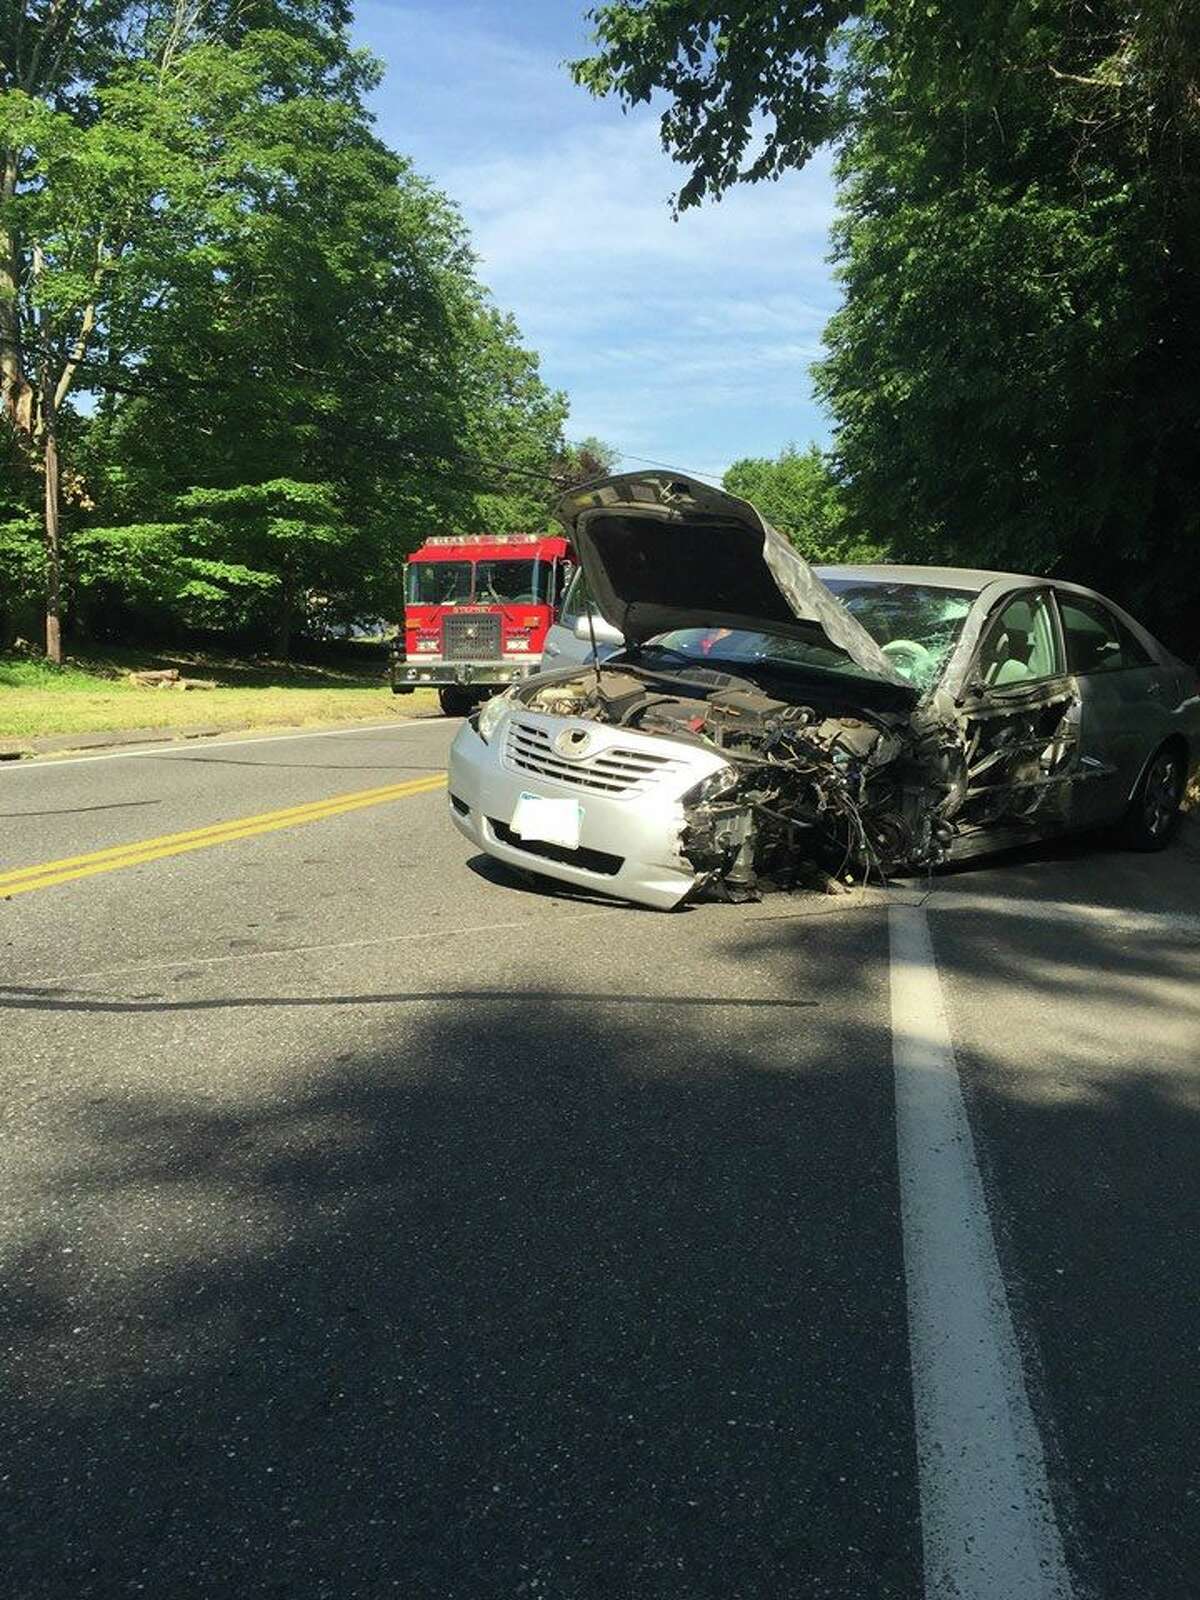 Monroe fire crews helped extricate one driver following a serious two-car collision on Elm Street Monday, June 18.